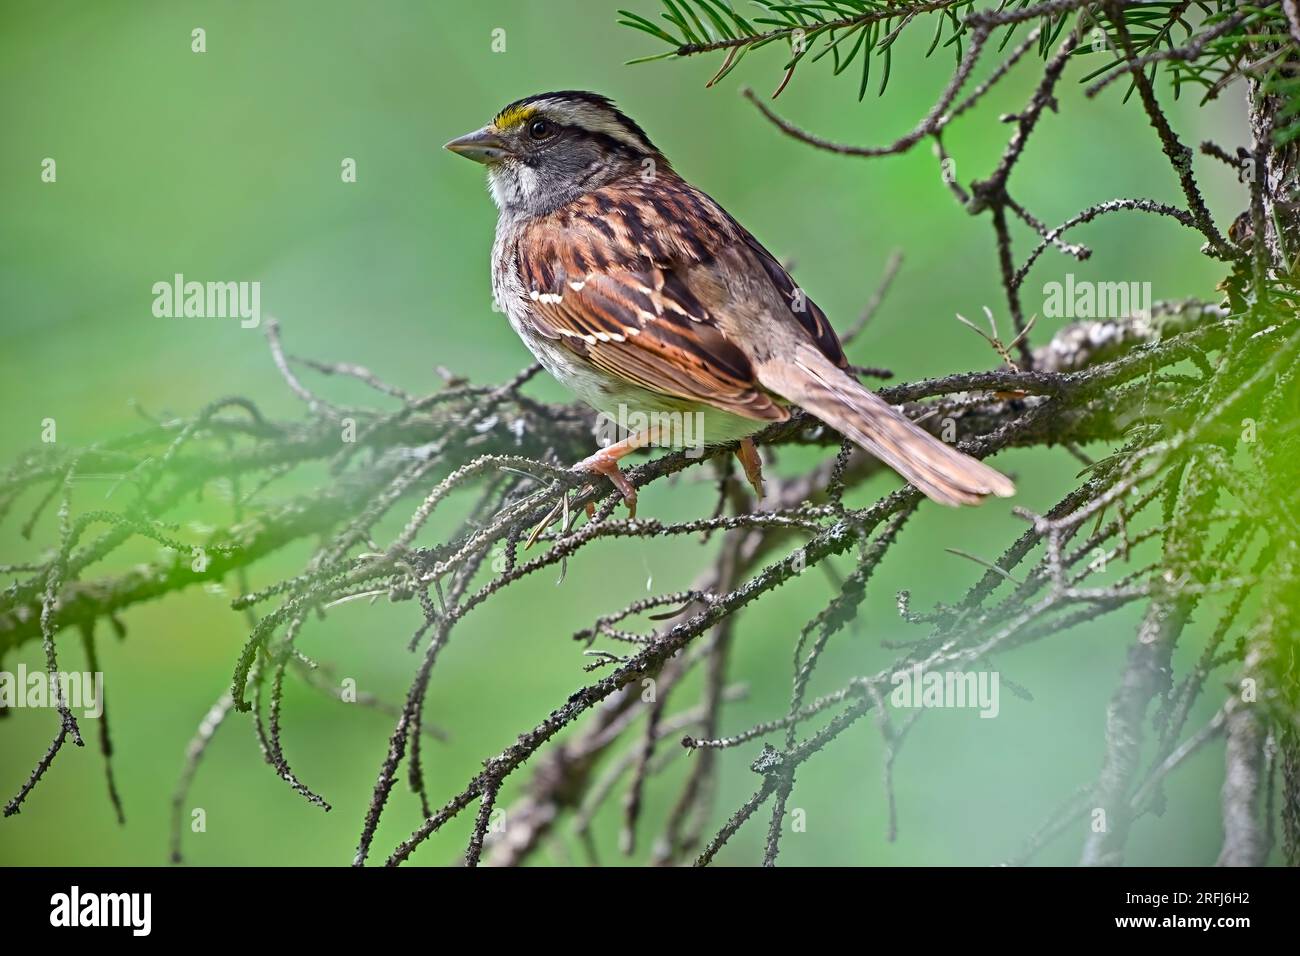 A White-throated Sparrow 'Zonotrichia albicollis', perched on a tree branch in his woodland habitat in rural Alberta Canada. Stock Photo